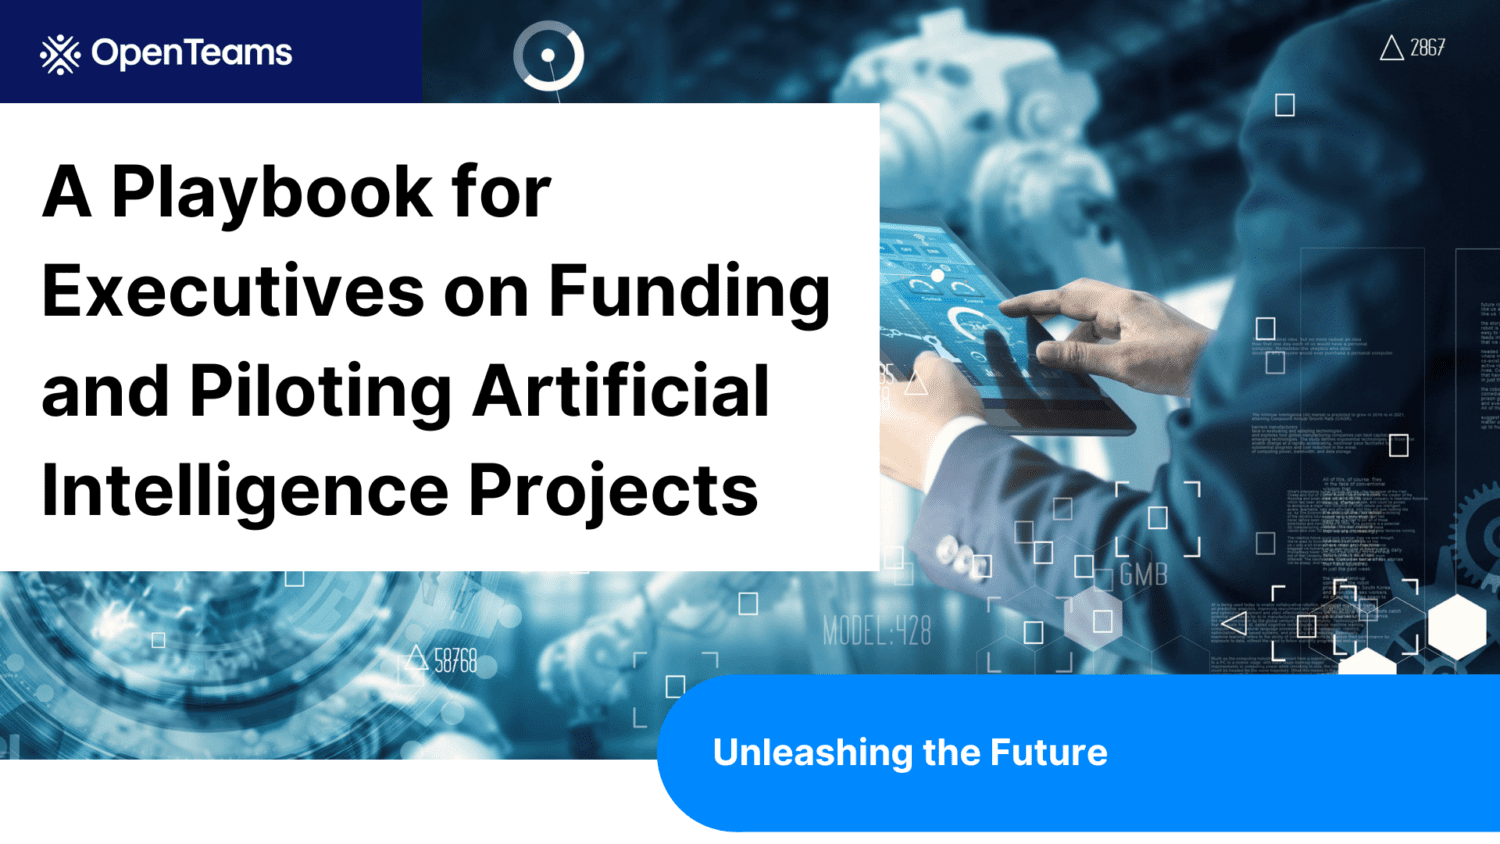 Unleashing the Future: A Playbook for Executives on Funding and Piloting Artificial Intelligence Projects